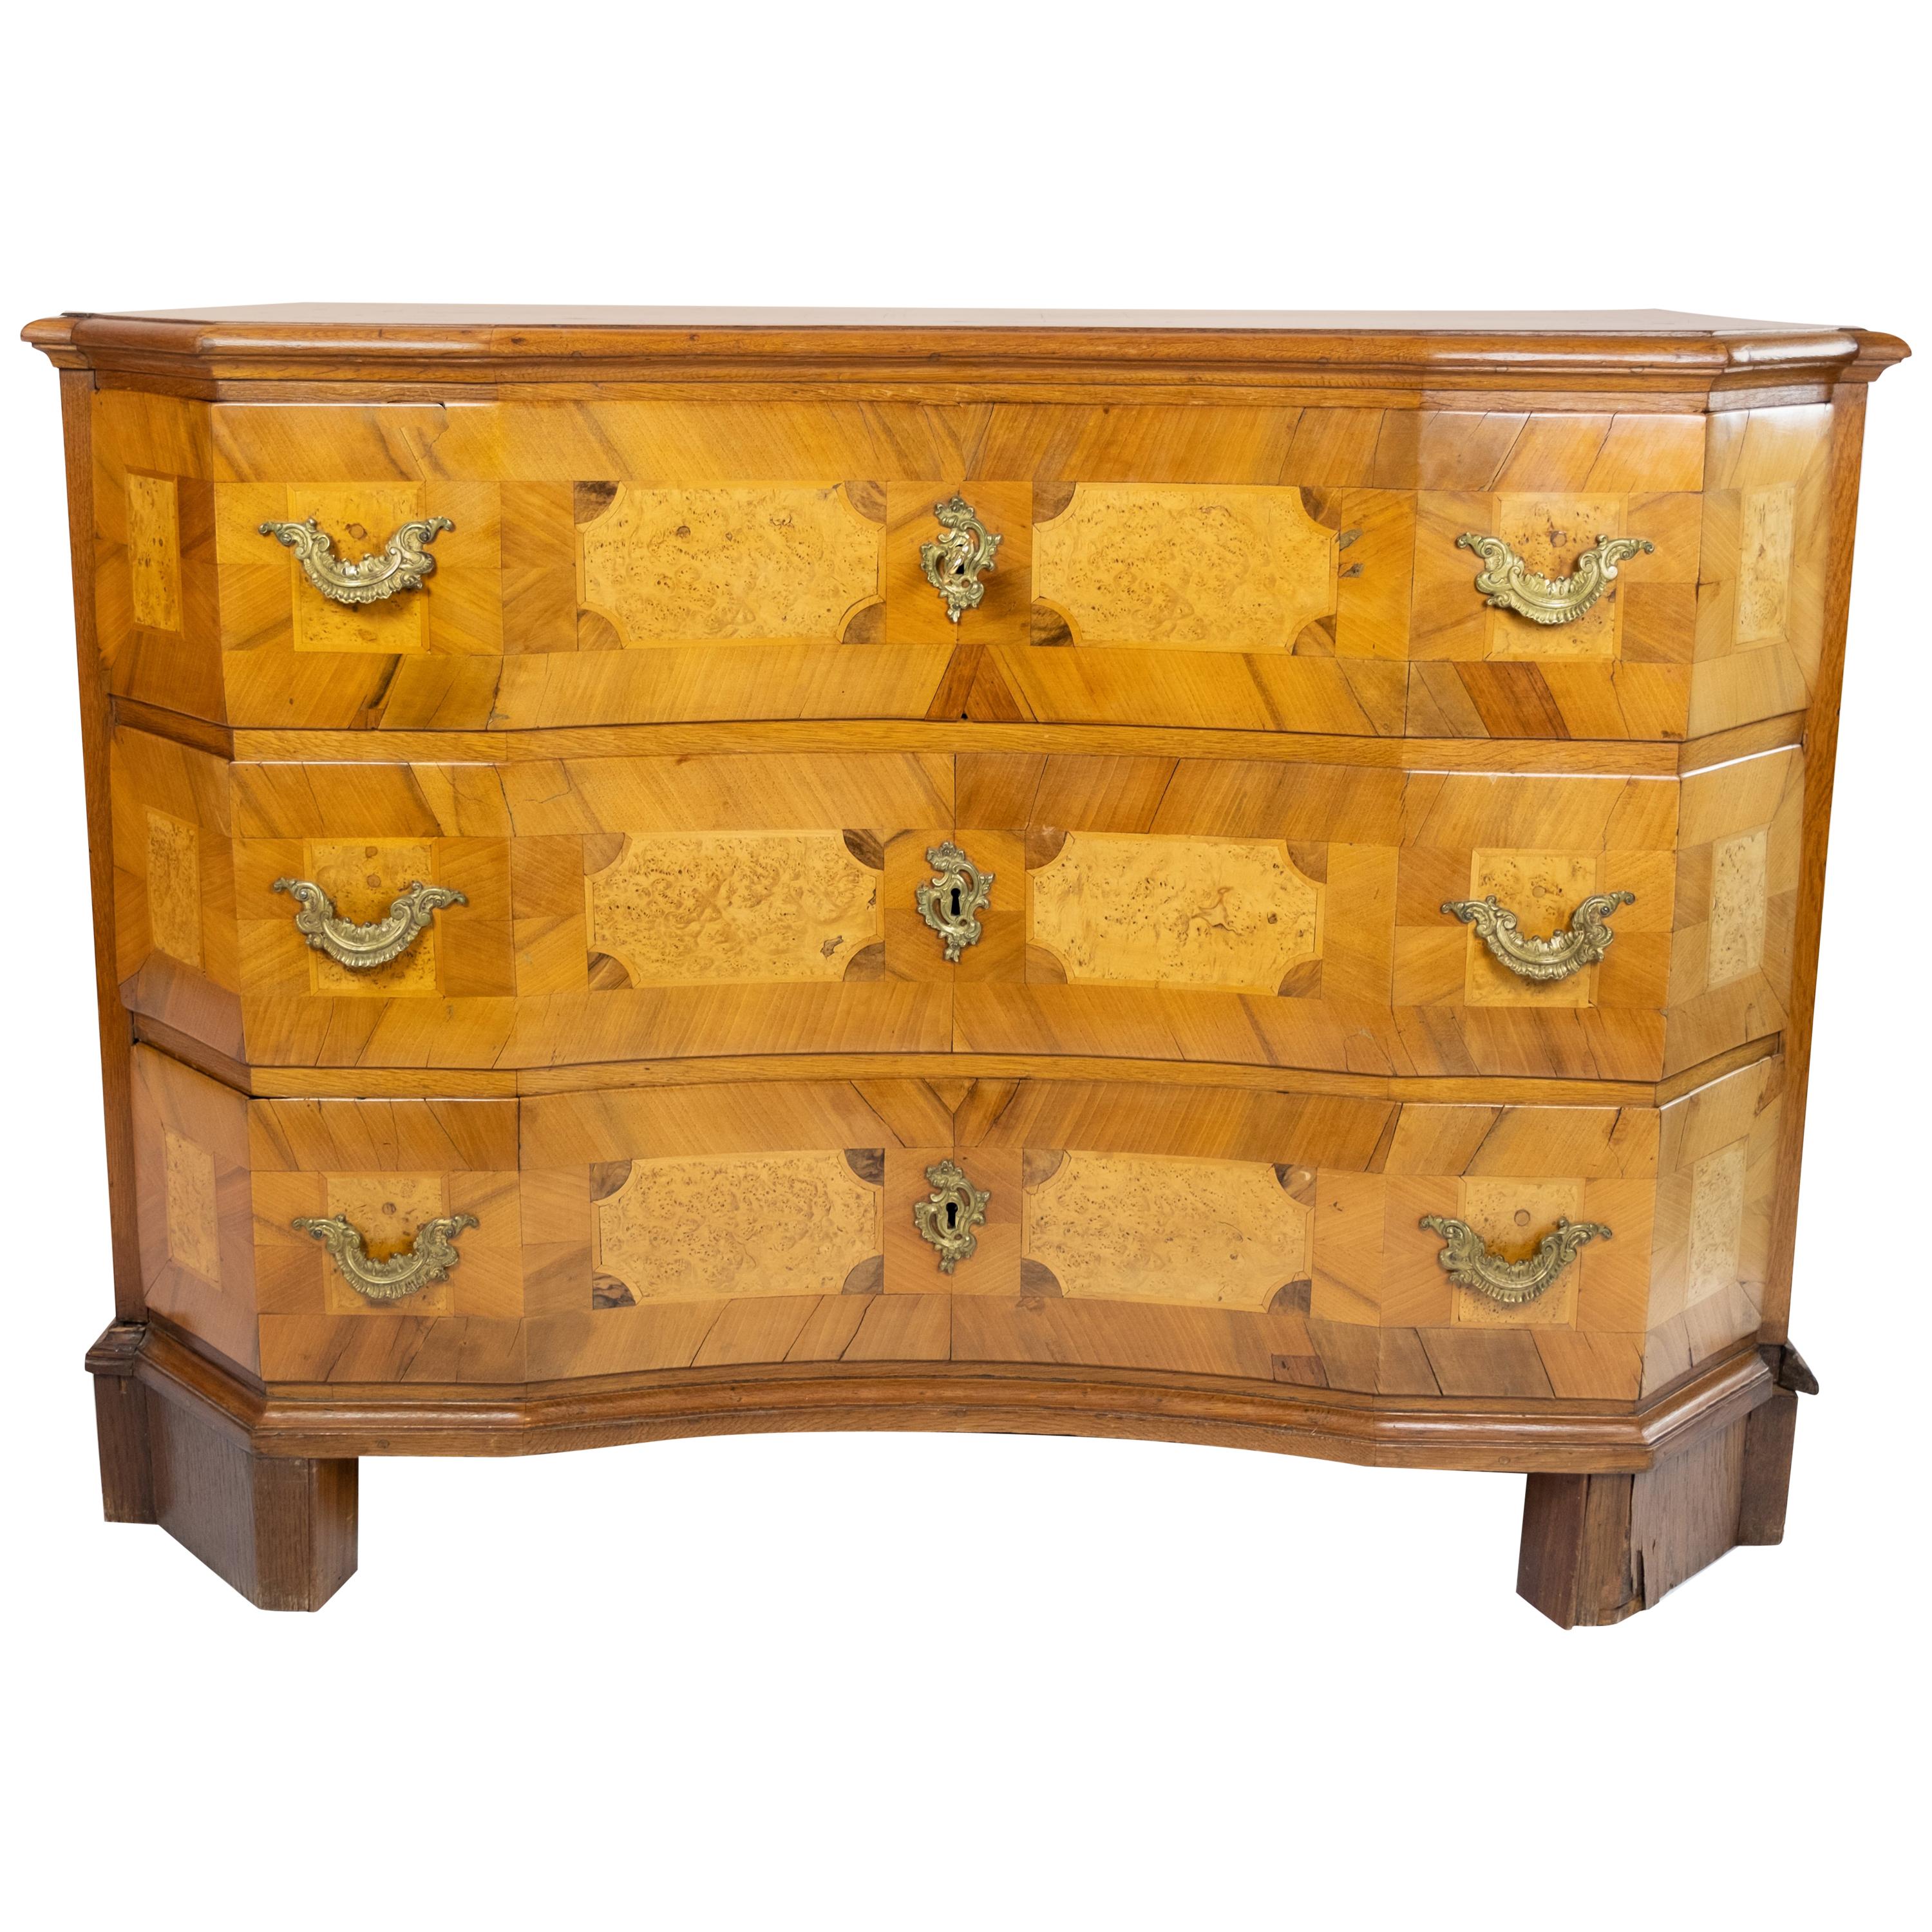 Antique Chest of Drawers in Walnut and Fruit Wood, 1780s